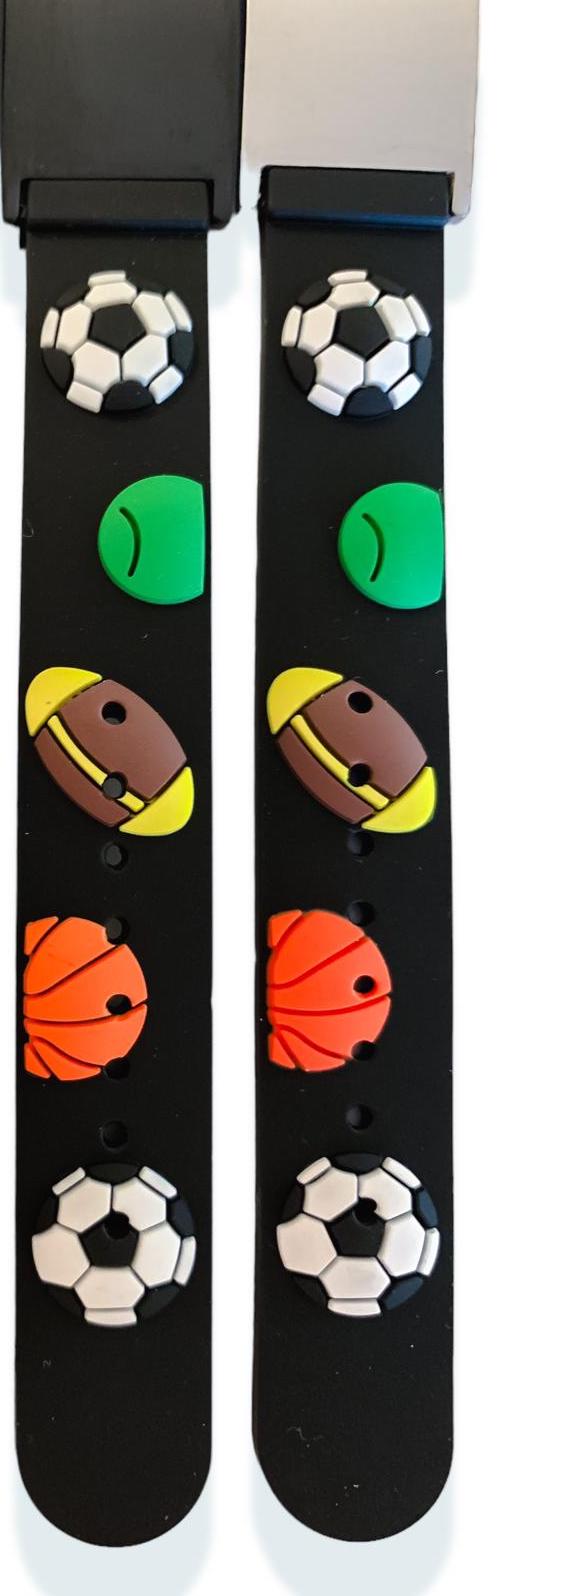 Kids Discovery medical alert bracelets with a black football, tennis, rugby, basketball design.